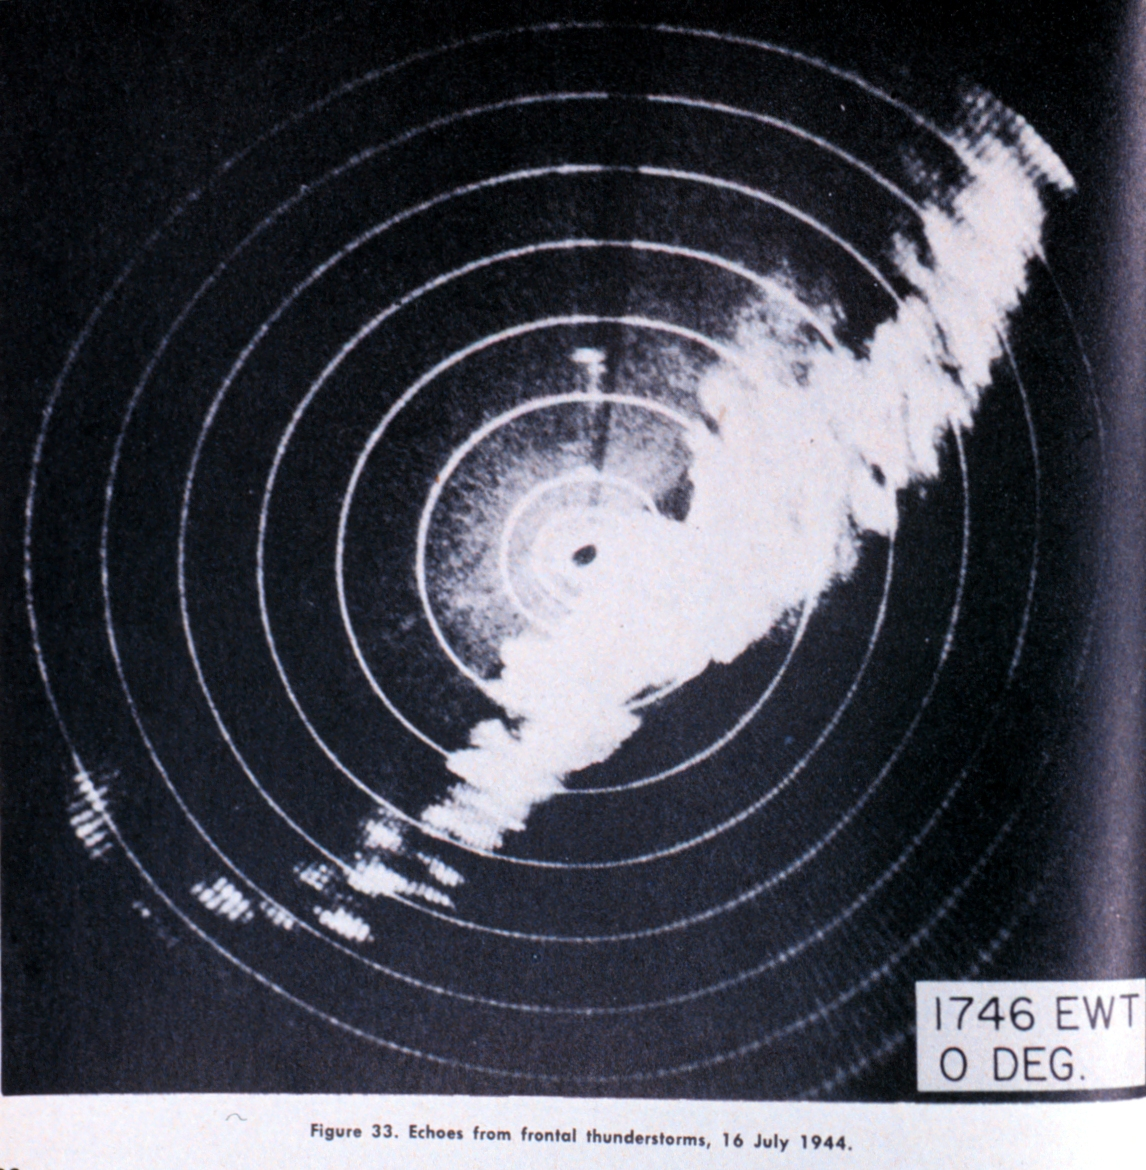 Echoes from frontal thunderstorms observed from a Radio Set SCR-584 mobileradar unit located at Spring Lake, New Jersey